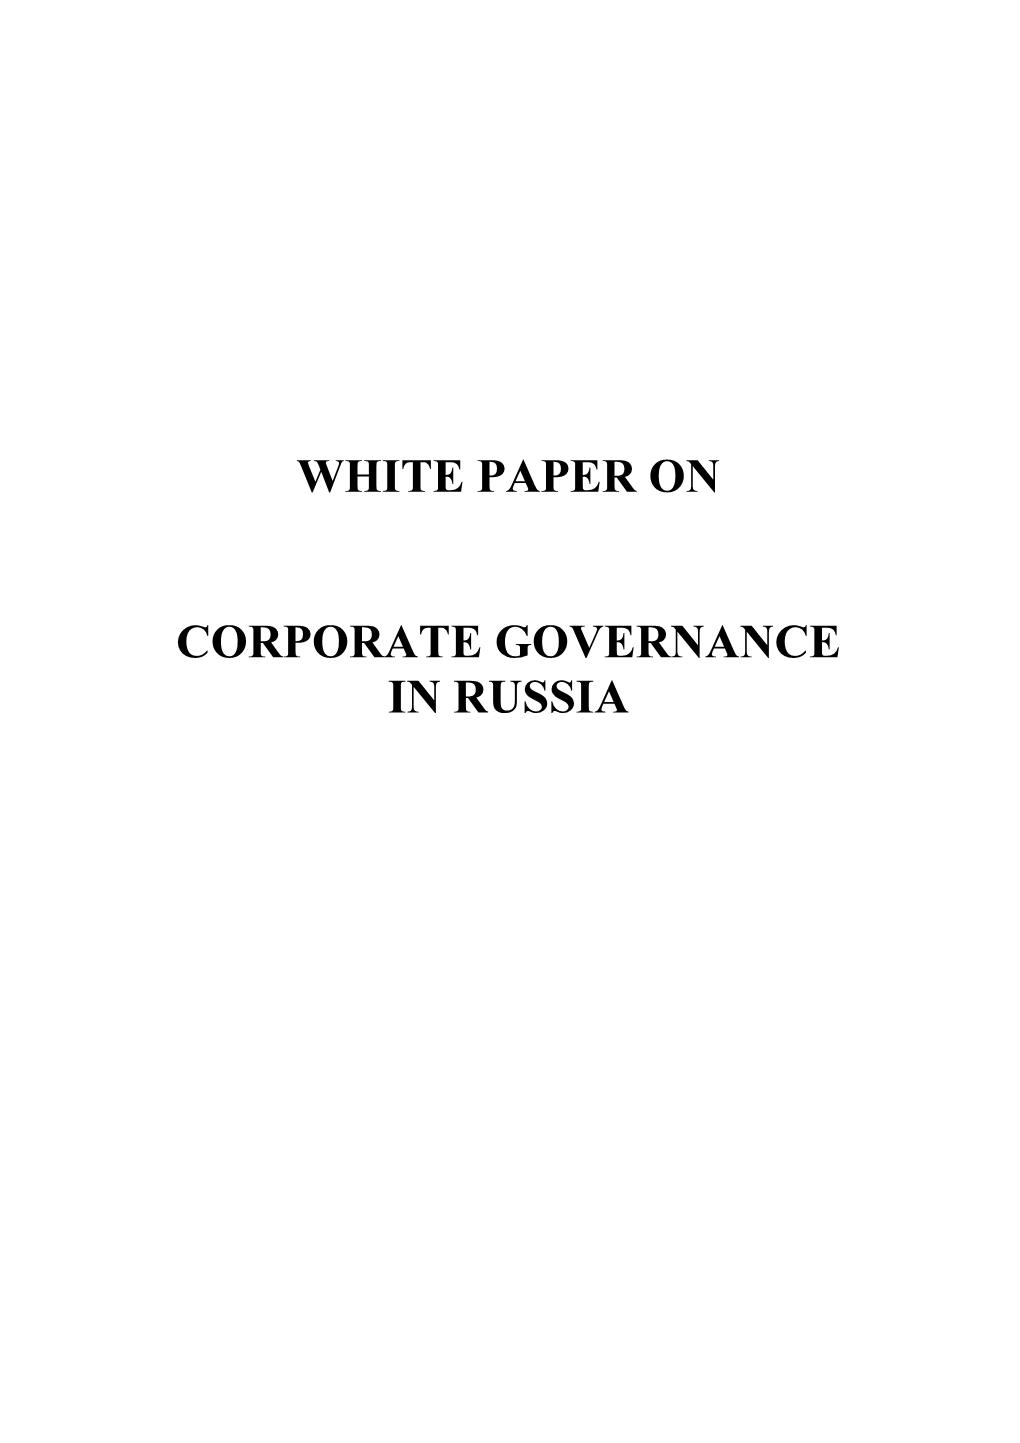 White Paper on Corporate Governance in Russia